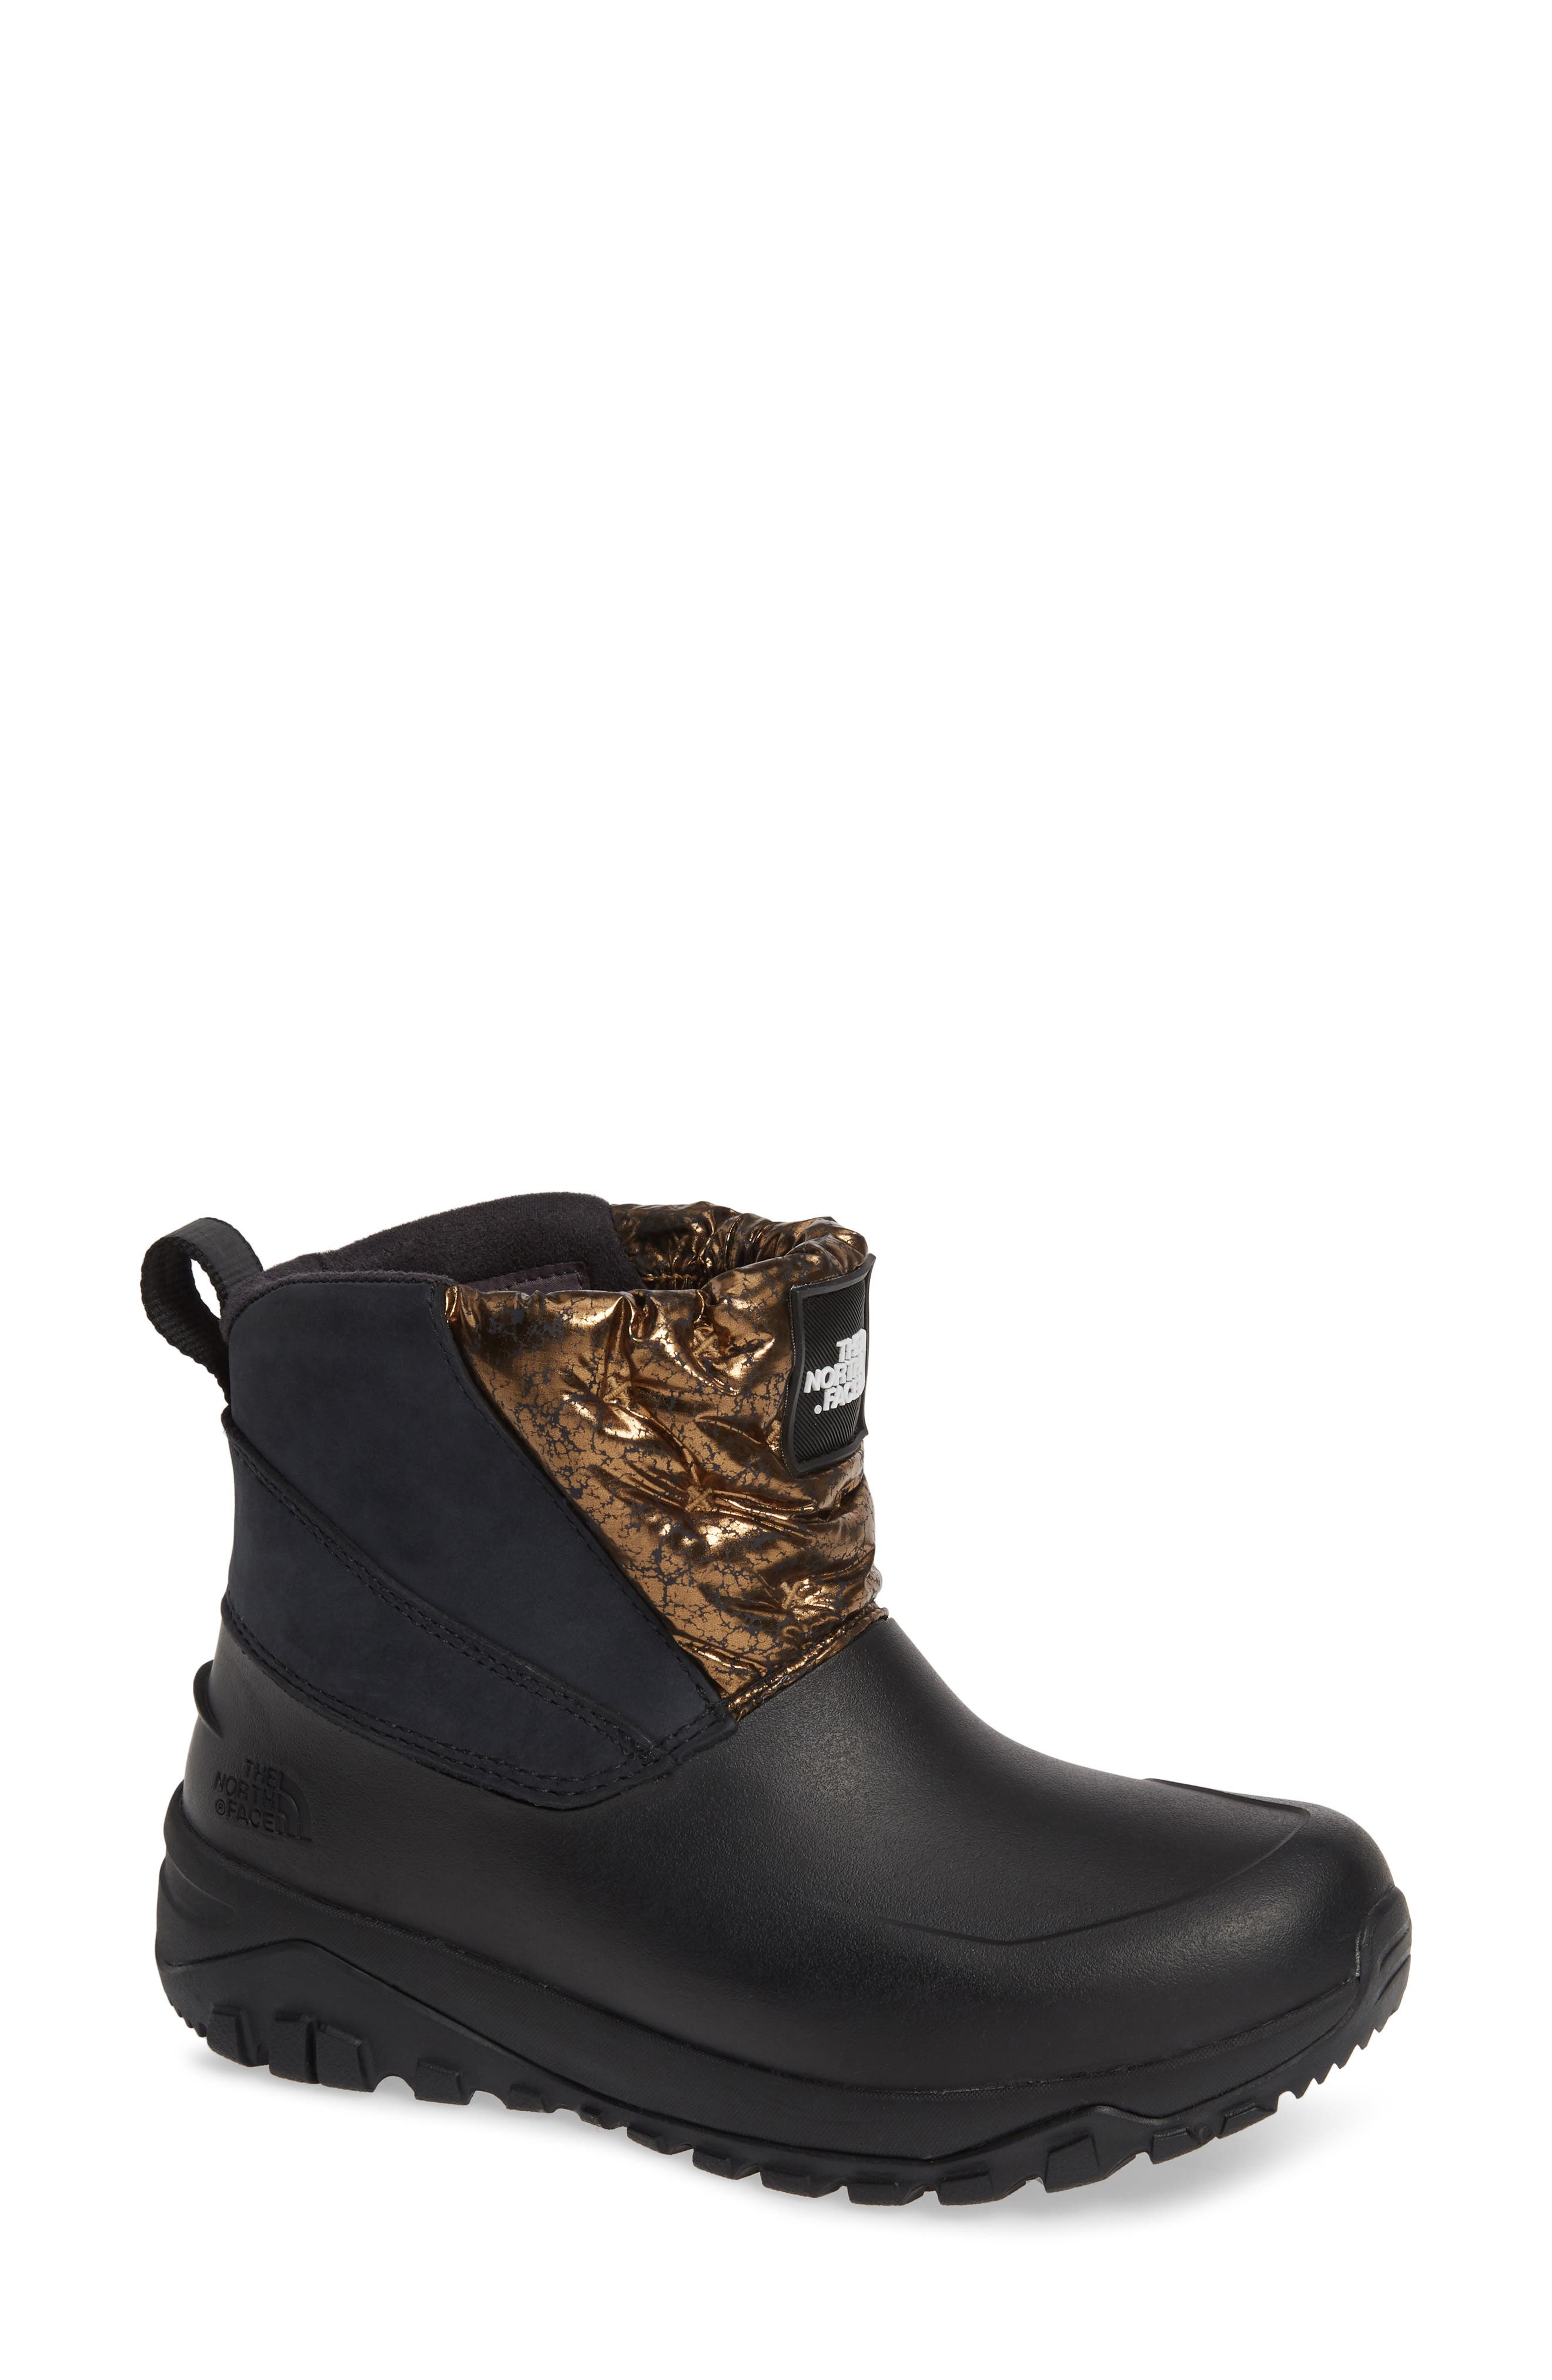 north face yukiona ankle boot